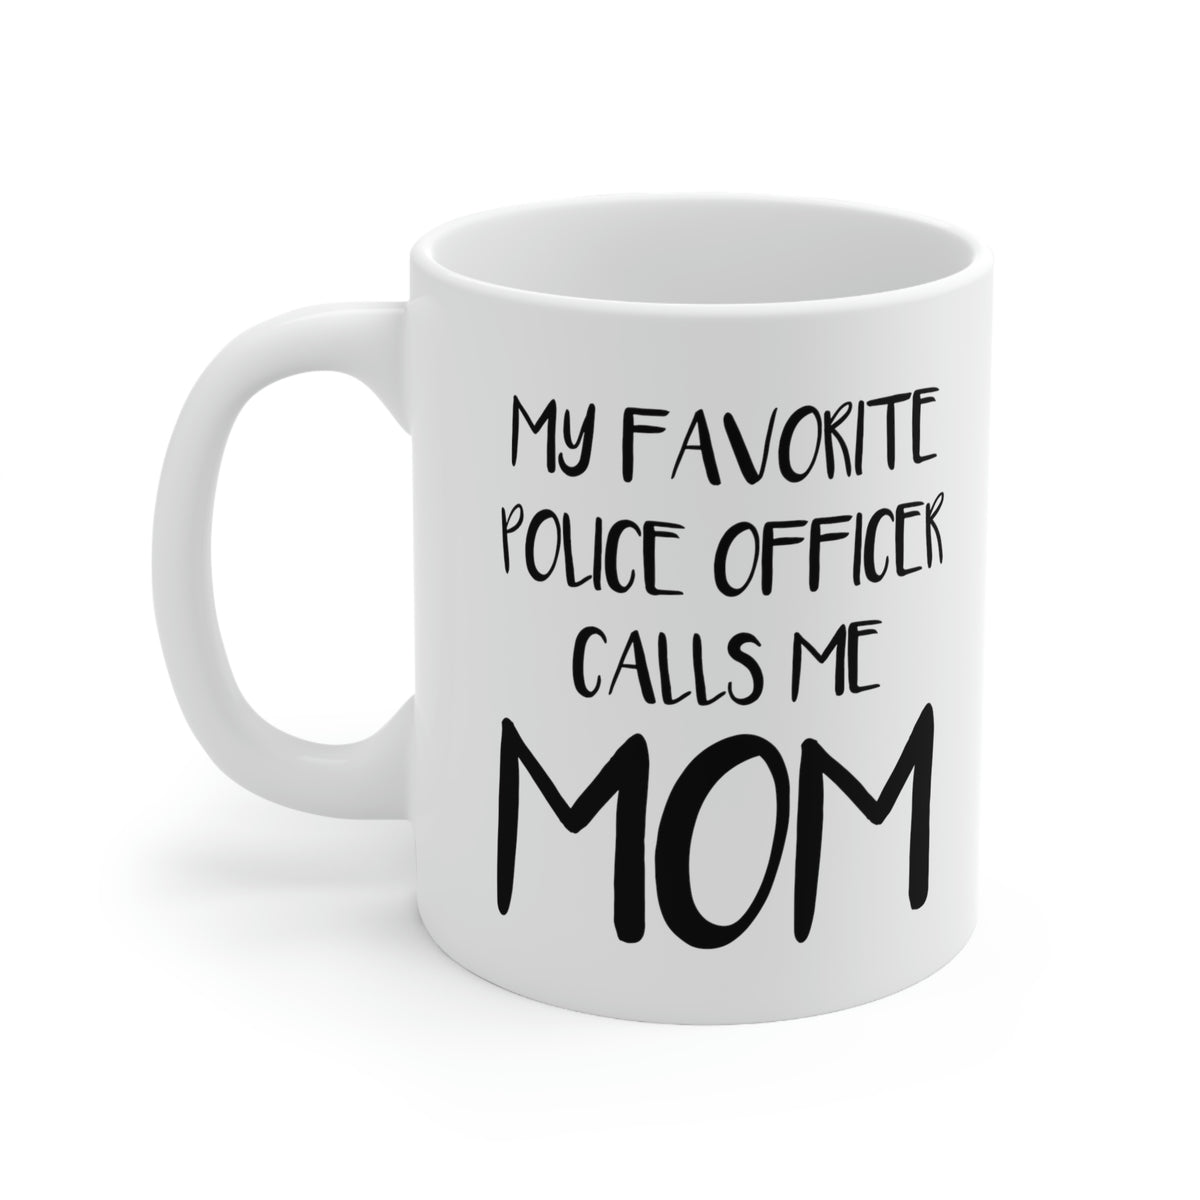 Police Officer Gifts for Mom, Police Mom Mug, My Favorite Police Officer Calls Me Mom, Police Academy Graduation Gifts, Birthday Christmas White Coffee Cup For Mother Coworker